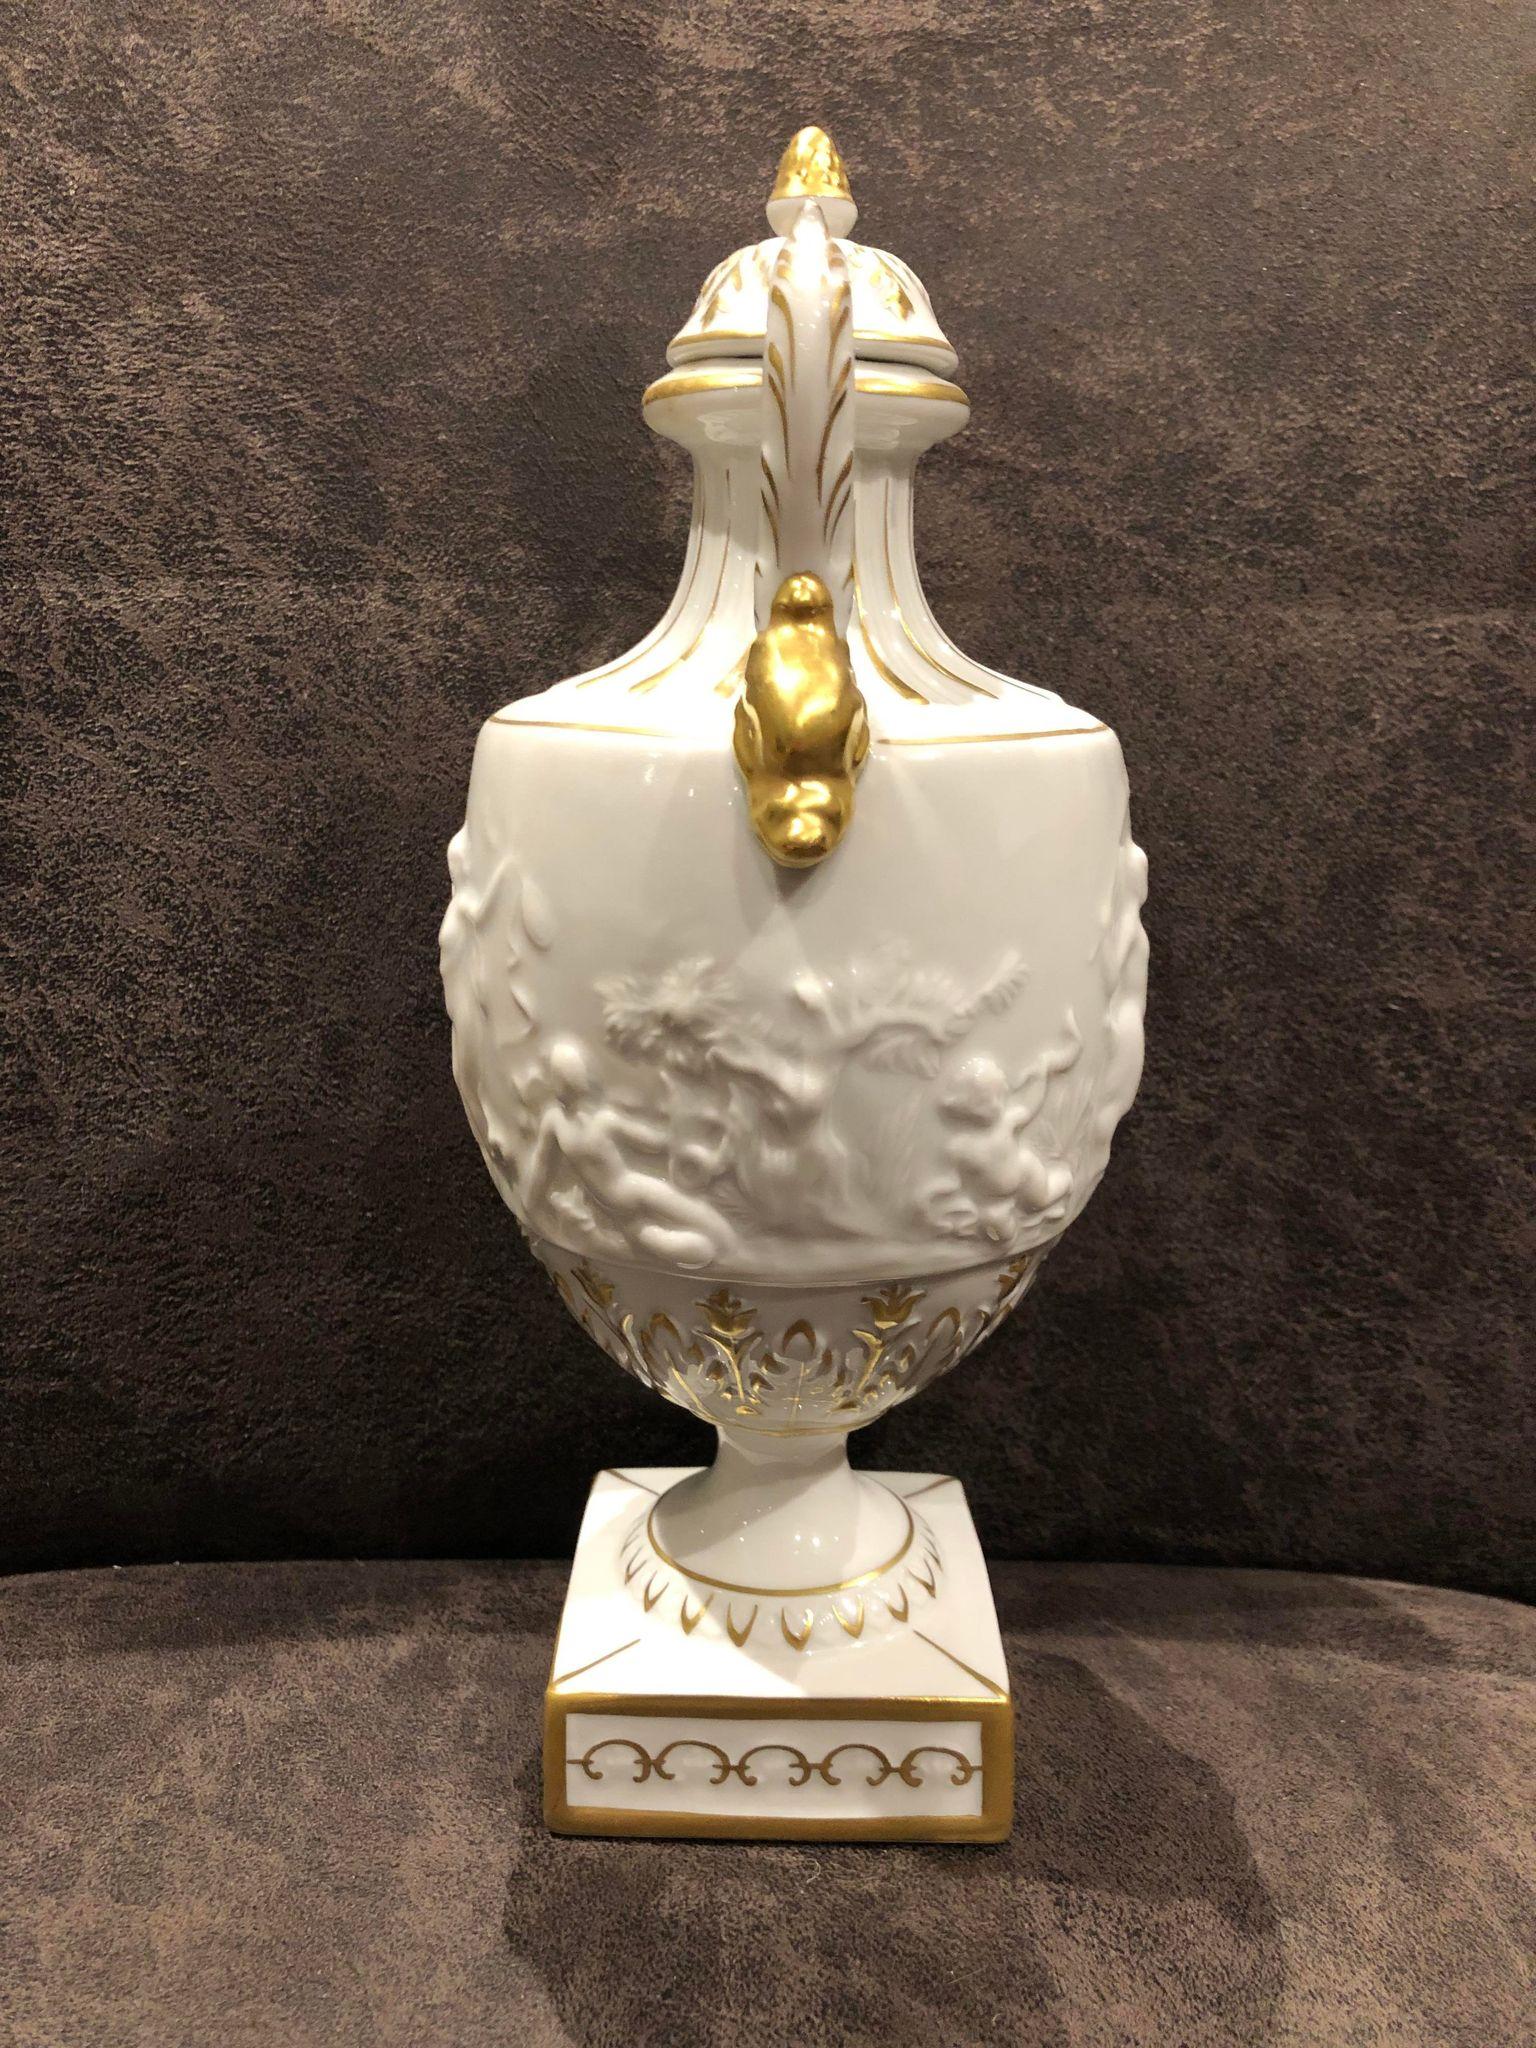 Fine porcelain vase with golded swan handles, palatial style. The classical amphora form, snow-white porcelain, the magnificent relief image of graceful ancient girls, the highest quality of work and gilding make this vase a wonderful decoration.